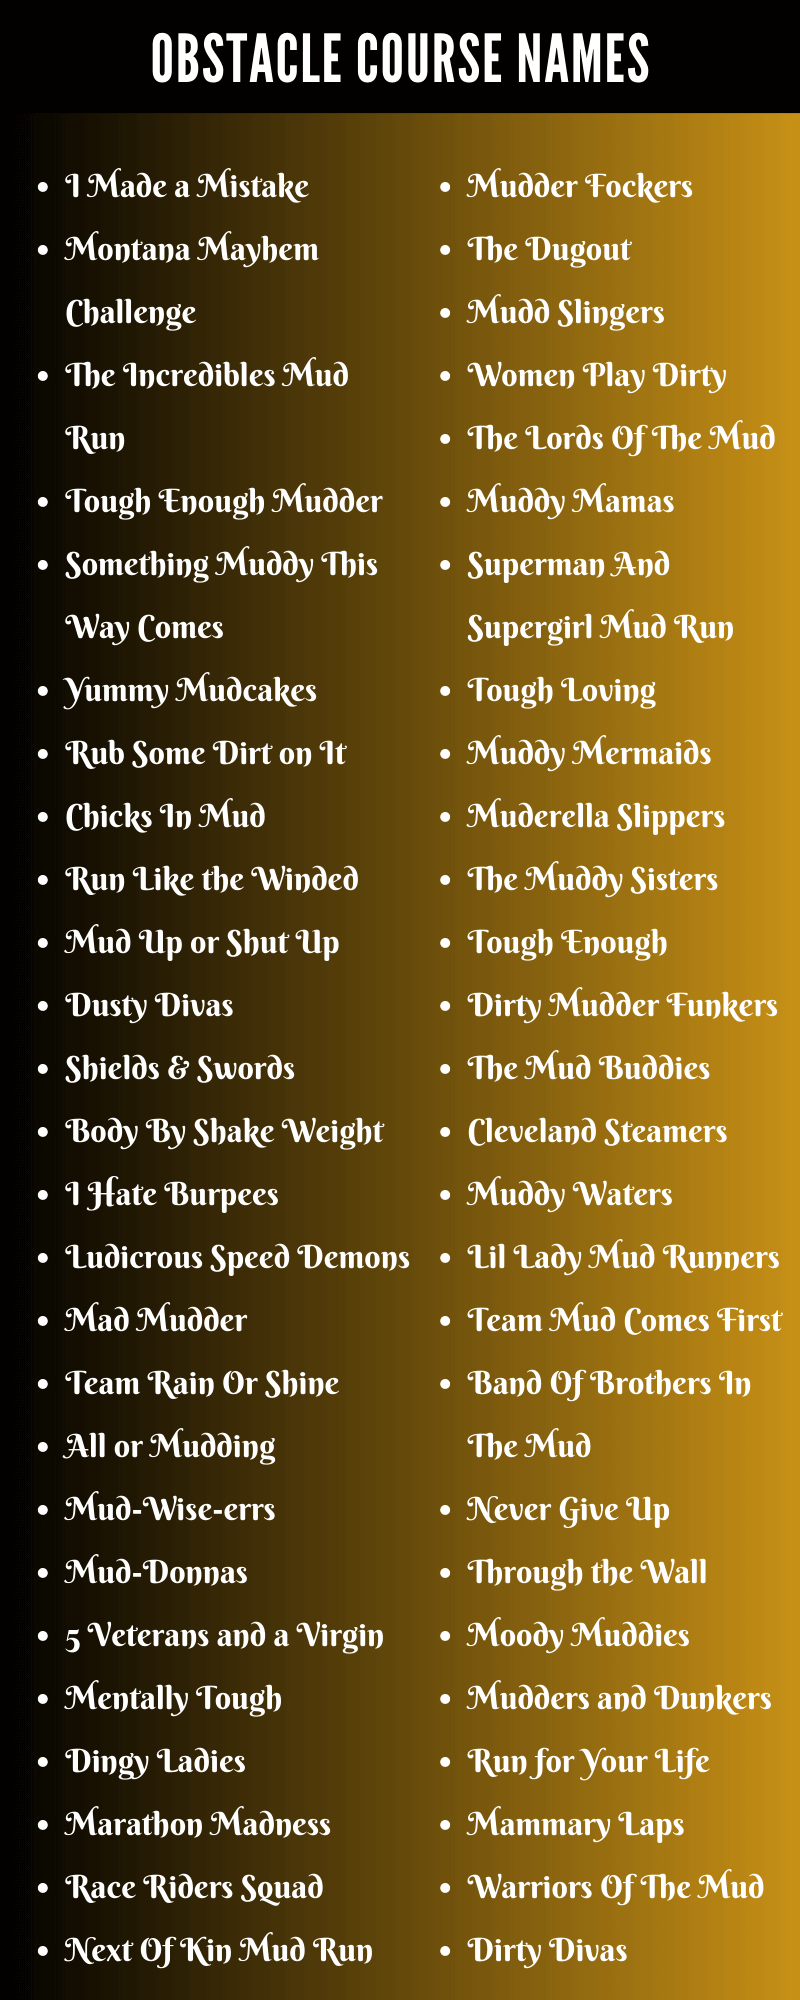 Obstacle Course Names